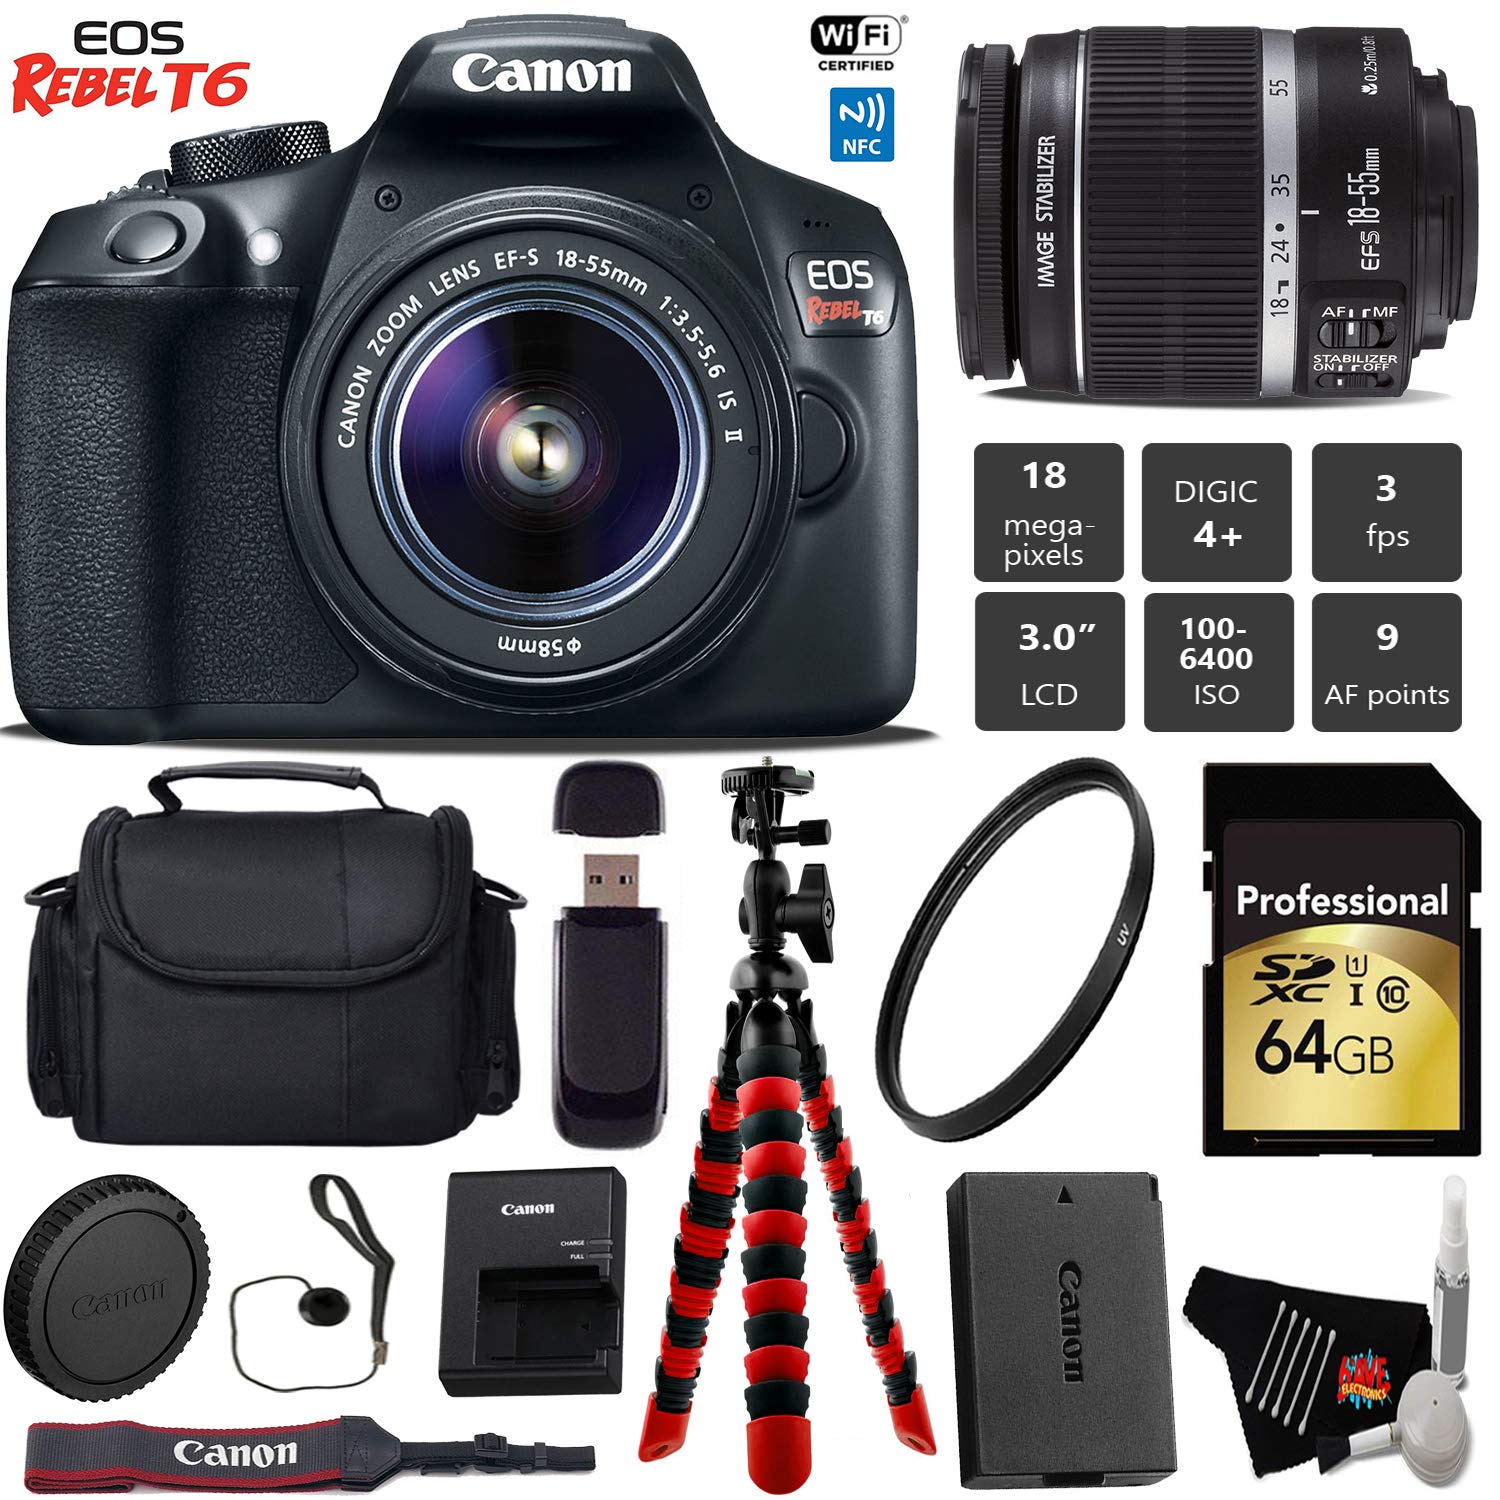 Canon EOS Rebel T6 DSLR Camera with 18-55mm is II Lens + Flexible Tripod + UV Protection Filter + Professional Case + Ca